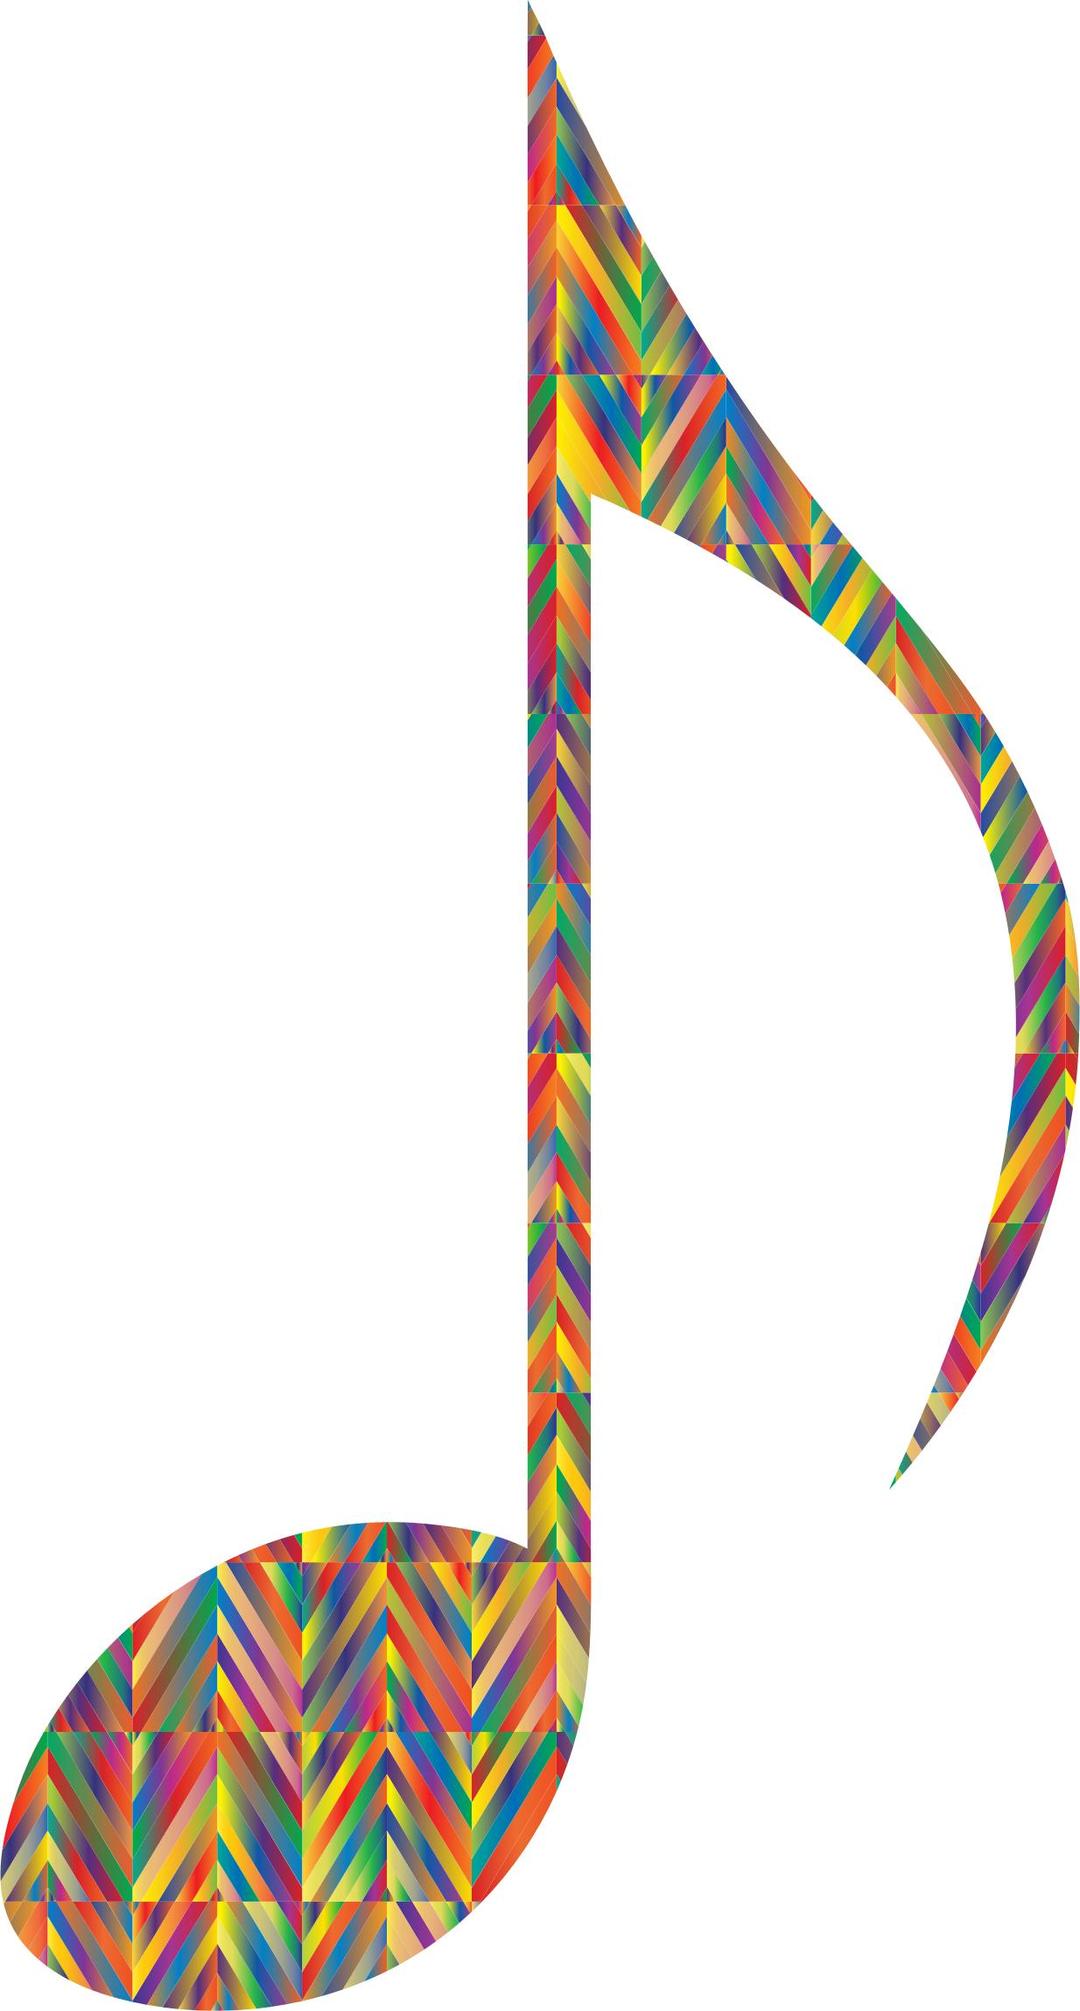 Prismatic Strips Musical Note 2 png transparent